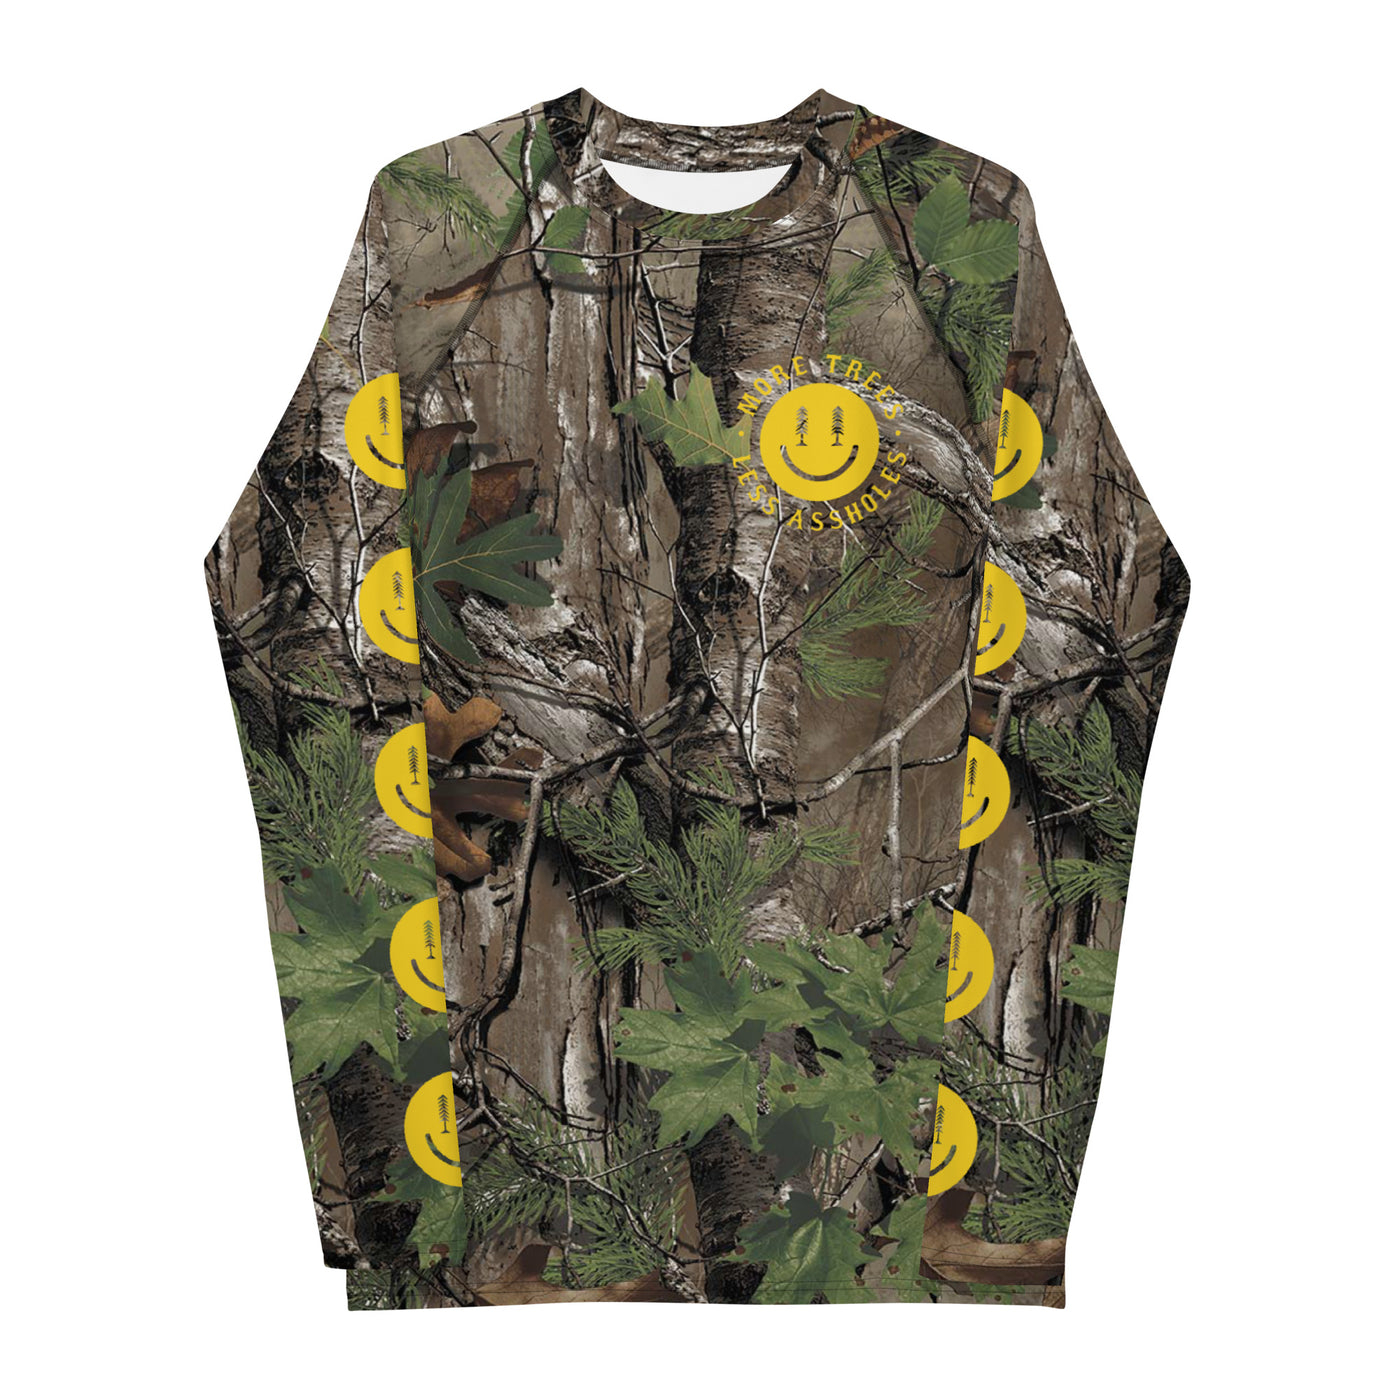 Lords x More Trees Wind Guard Jersey - Realtree Camo